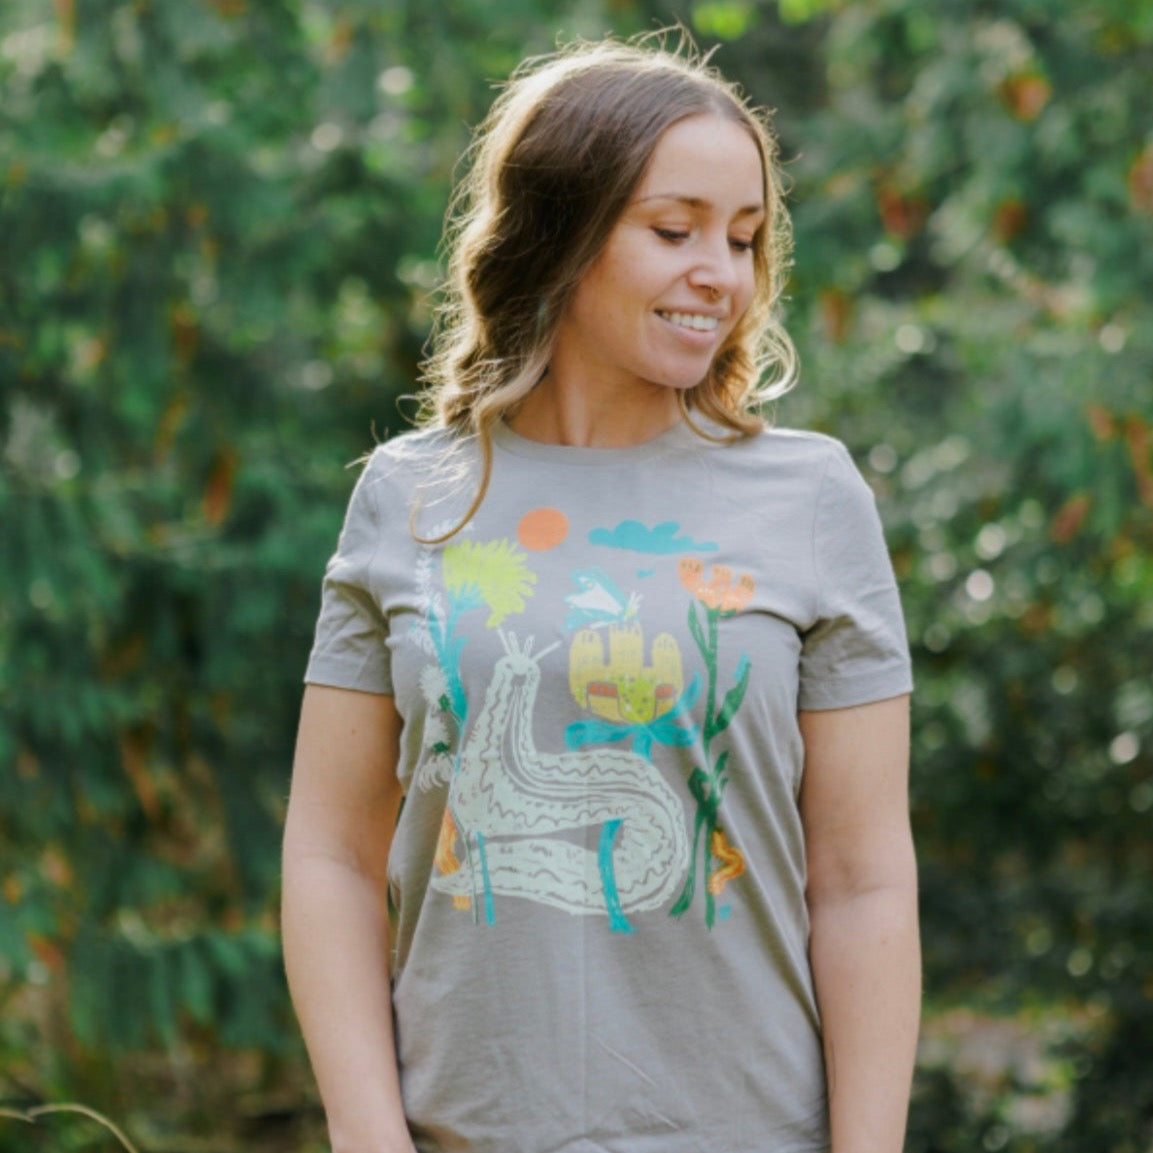 Woman wearing light brown t shirt with colorful print of plants and bugs